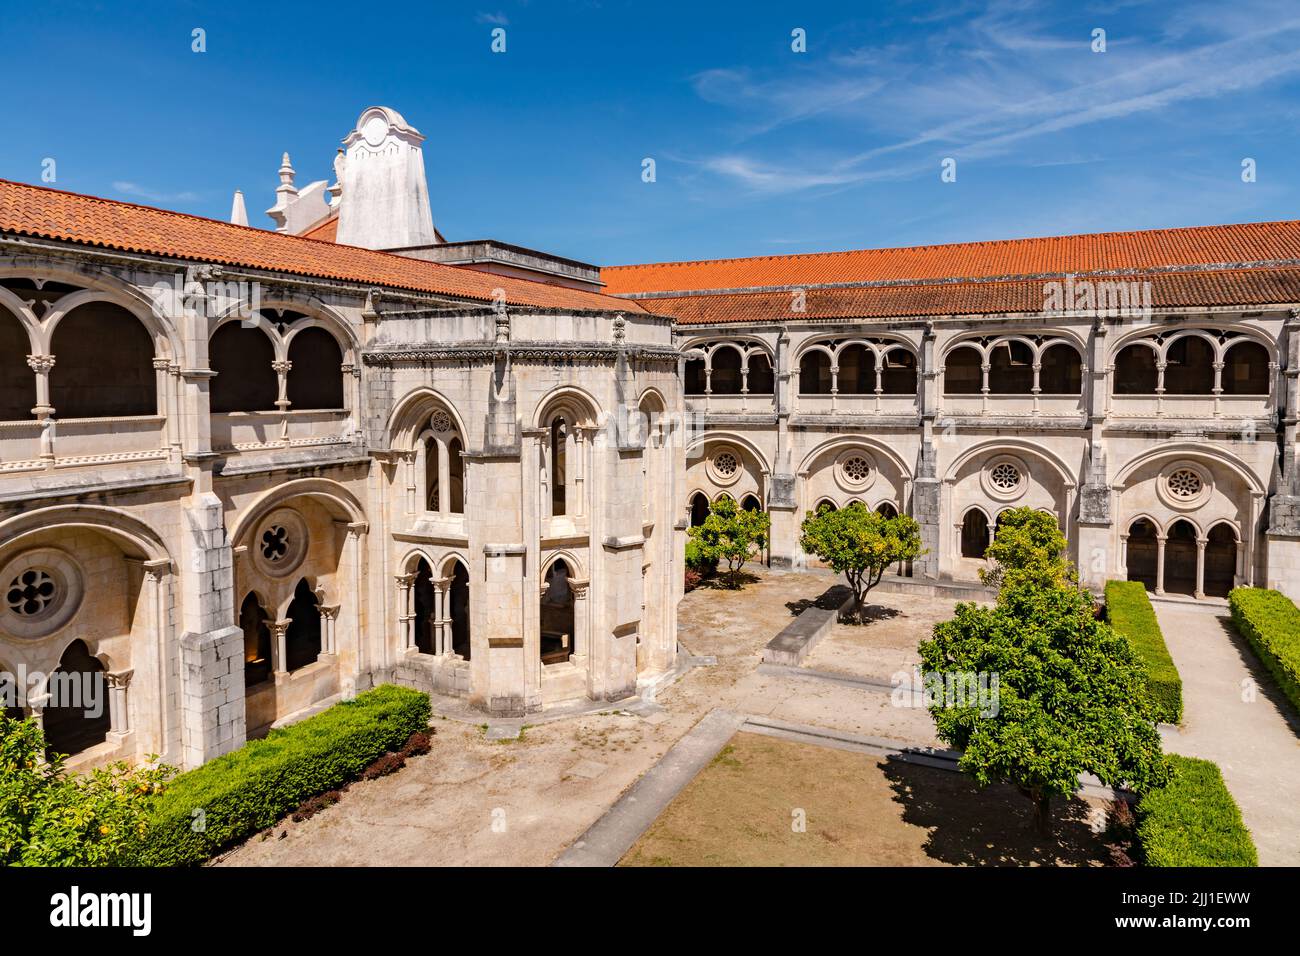 Panorama from the garden and cloister of the monastery complex of Mosteiro de Alcobaca, Portugal Stock Photo